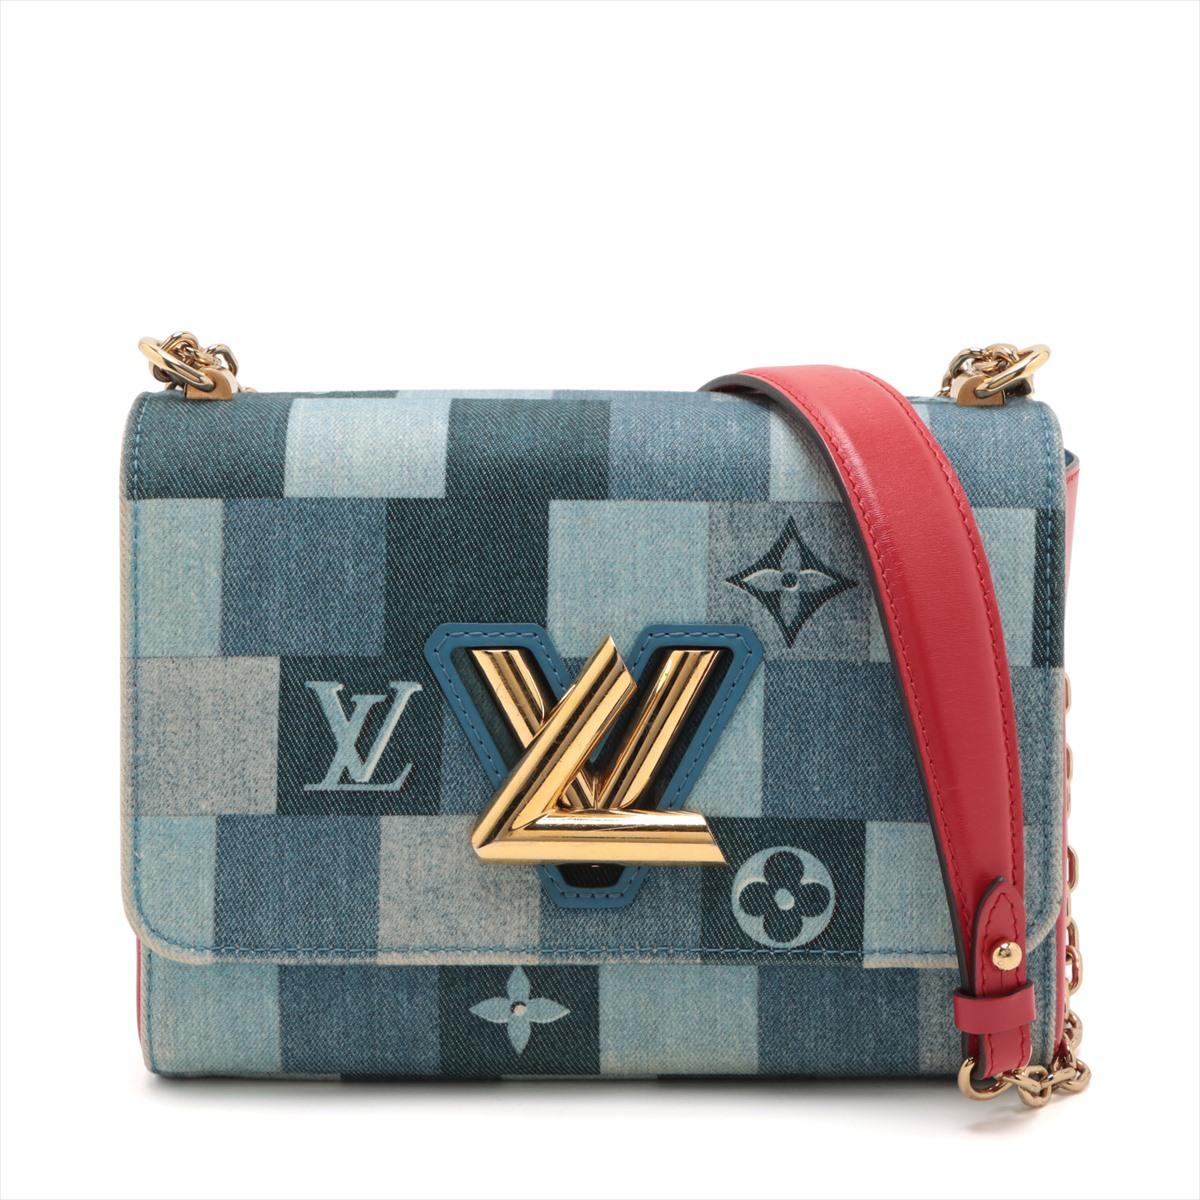 The Louis Vuitton Bicolor Denim Twist MM Bag is a vibrant and playful addition to the brand's collection. Crafted from a combination of denim fabrics in various shades and patterns, the bag showcases Louis Vuitton's innovative approach to design.